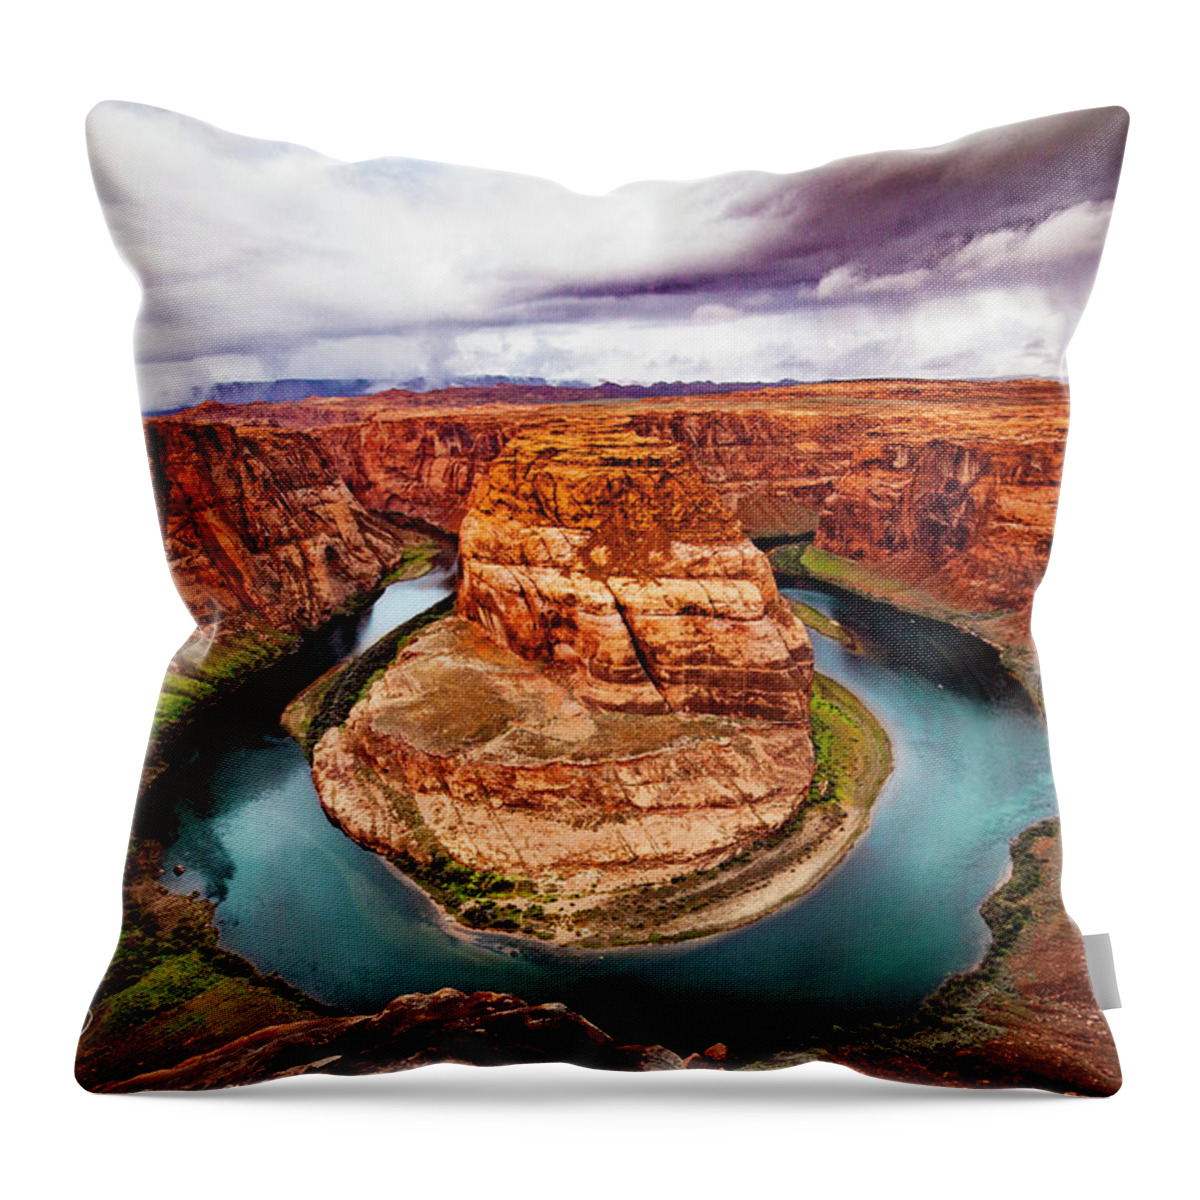 Arizona Throw Pillow featuring the photograph Horseshoe Bend by Darcy Dietrich